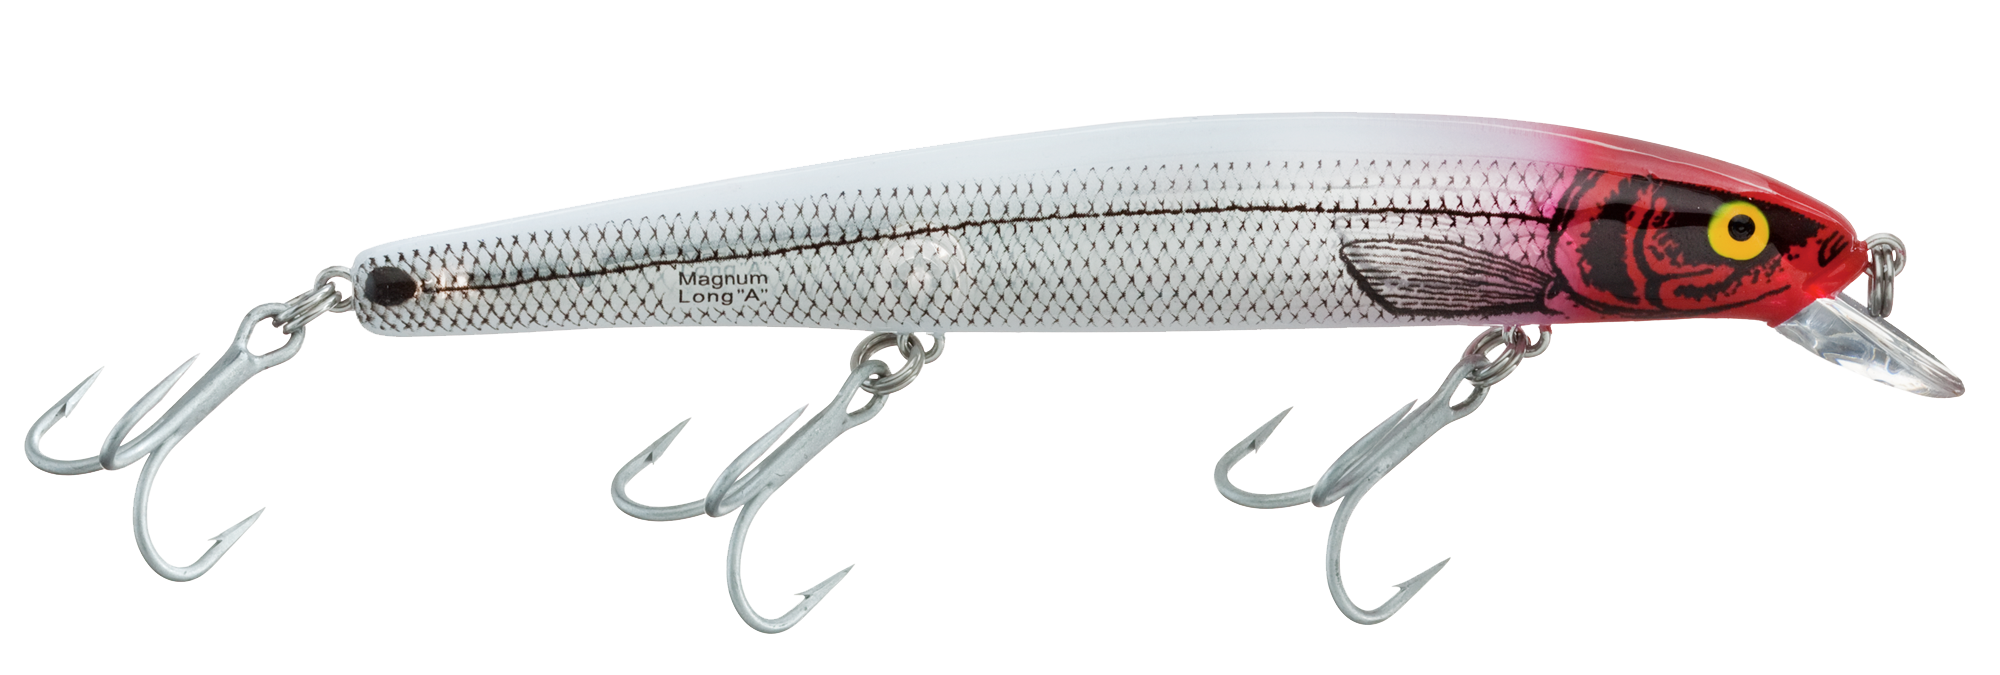 Bomber Lures BSW16JXSIG Saltwater Grade Heavy Duty Jointed Long A Bait,  Silver Flash/Green Back, Diving Lures -  Canada